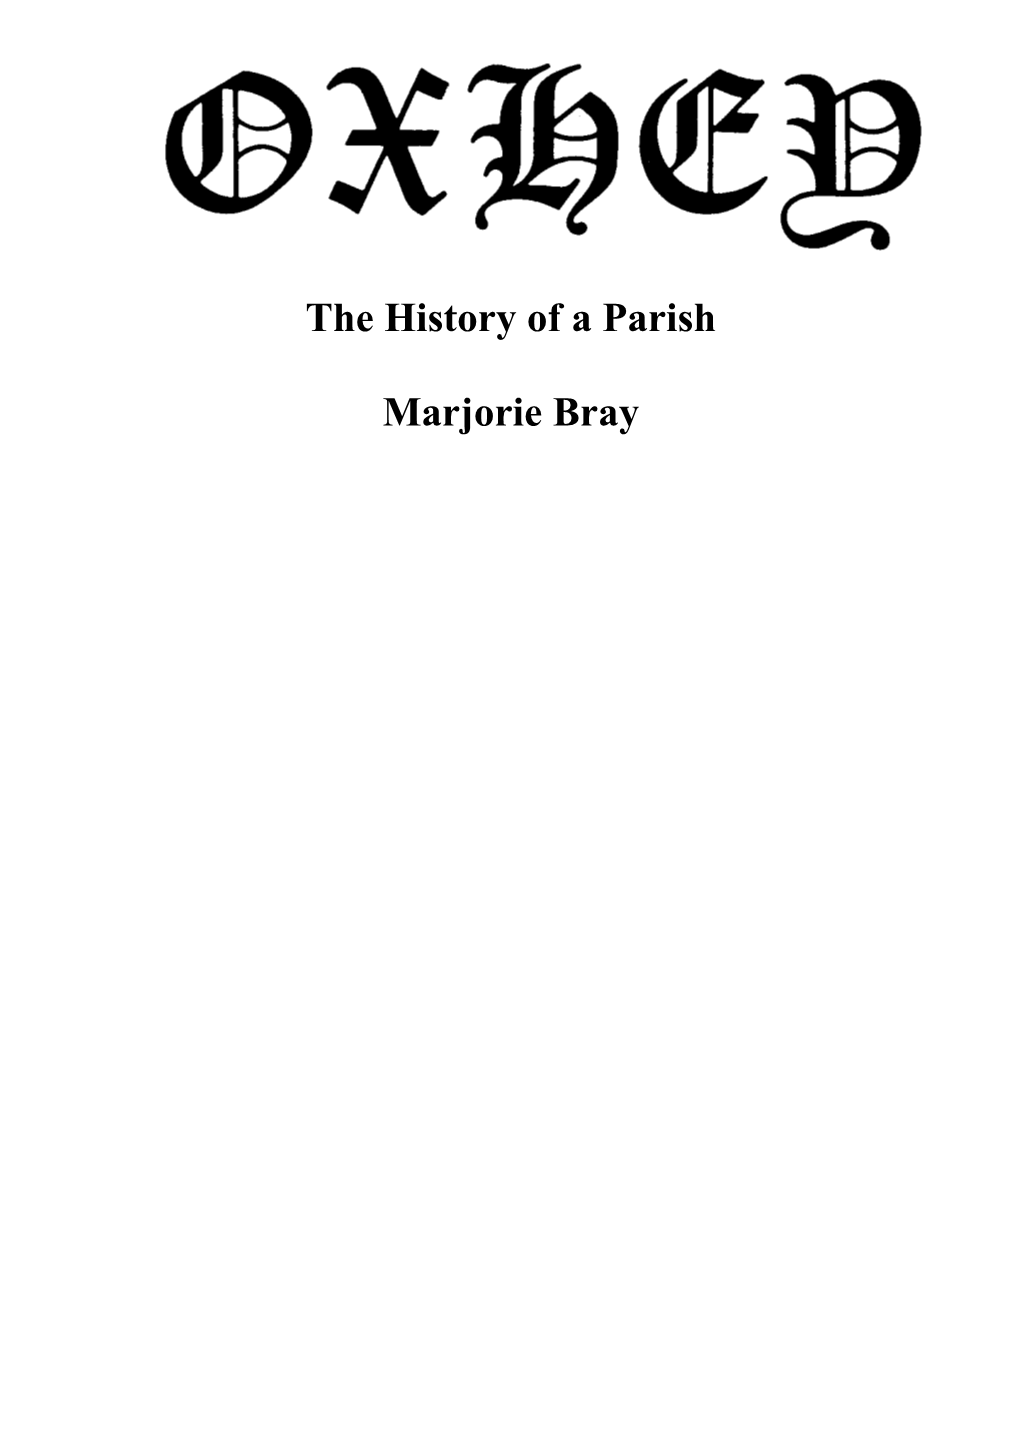 Oxhey - The History Of A Parish